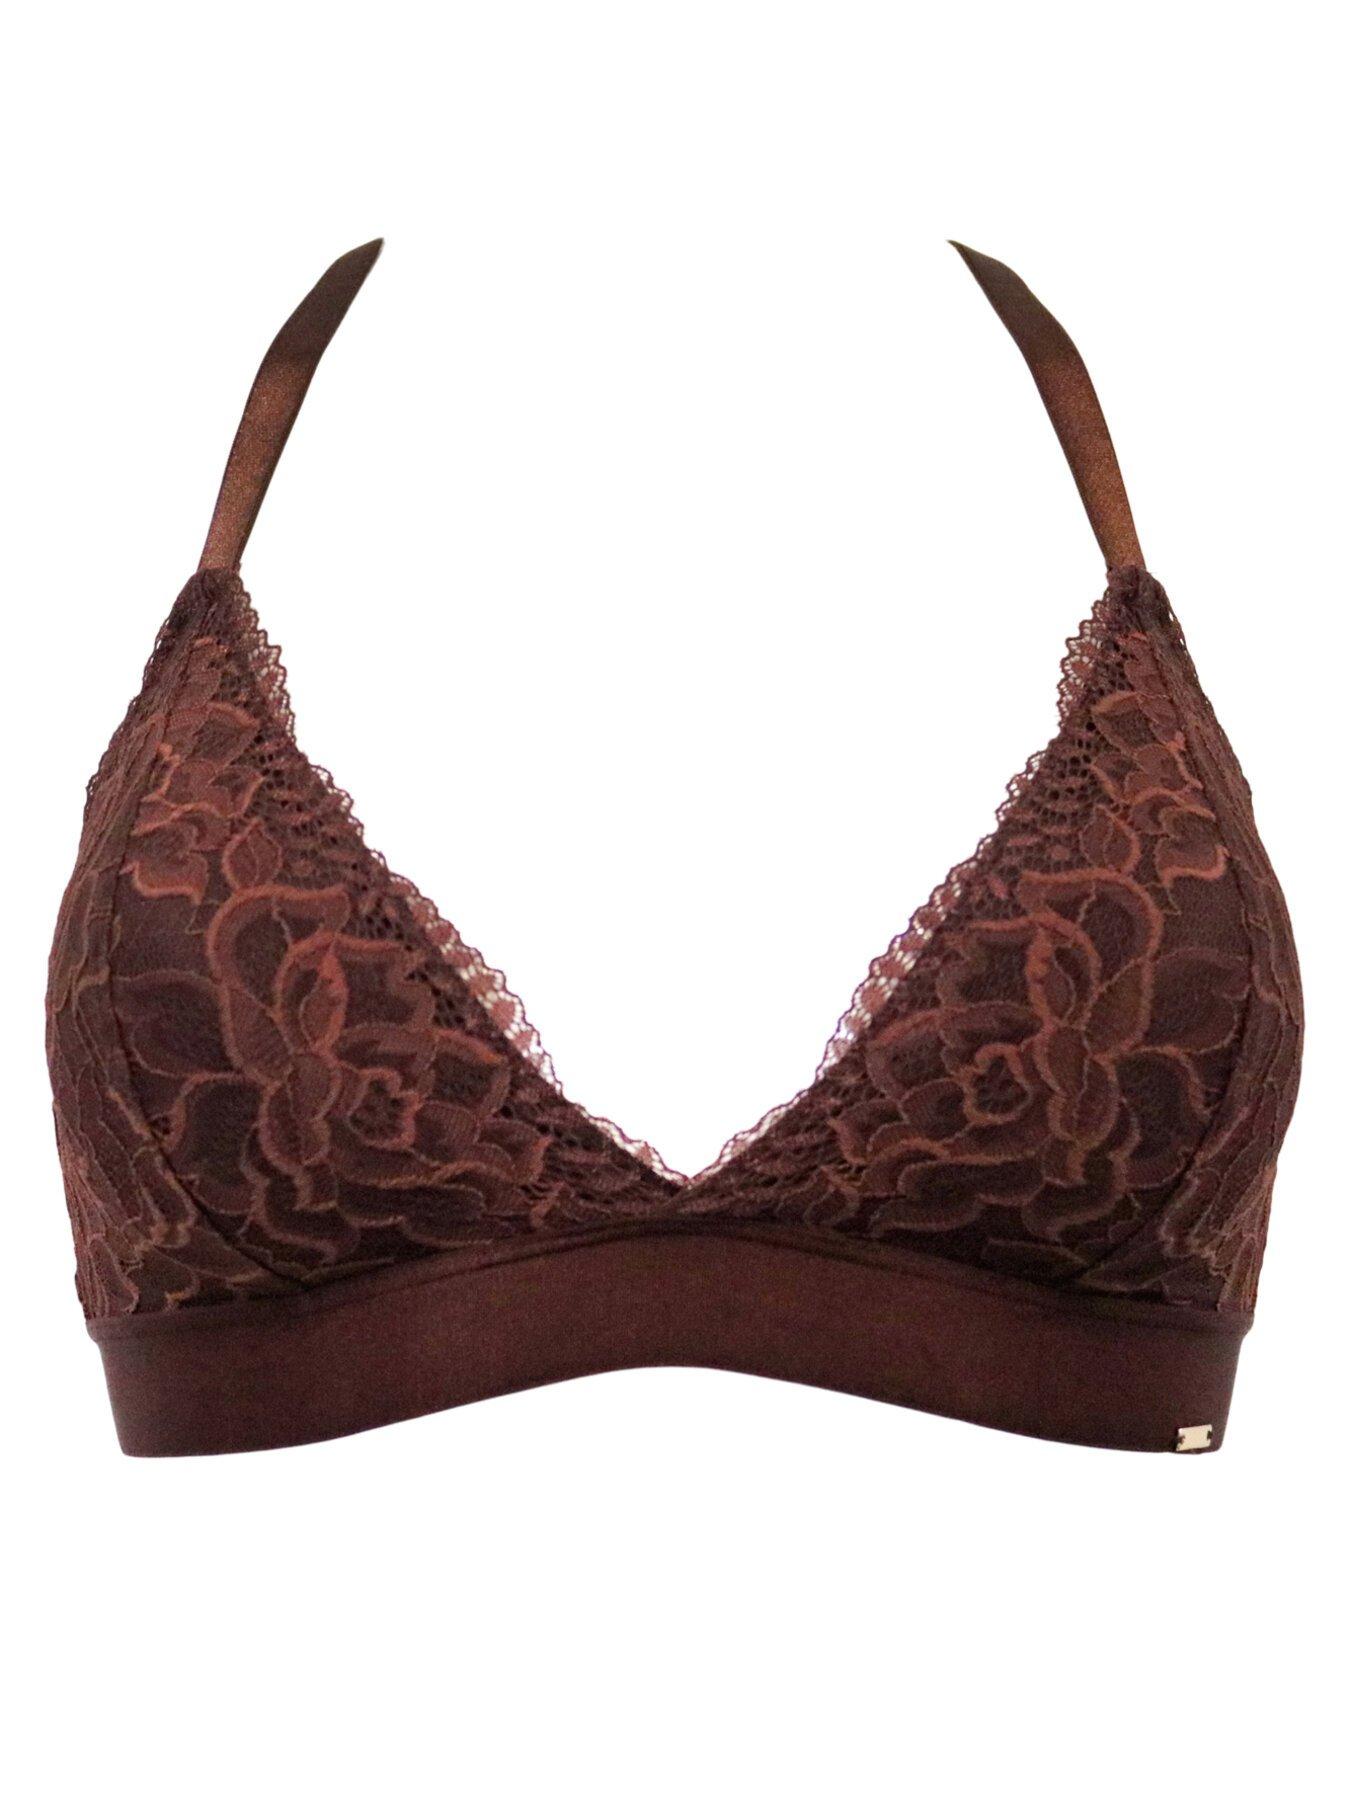 India Removable Padded Soft Triangle Bra, Pour Moi